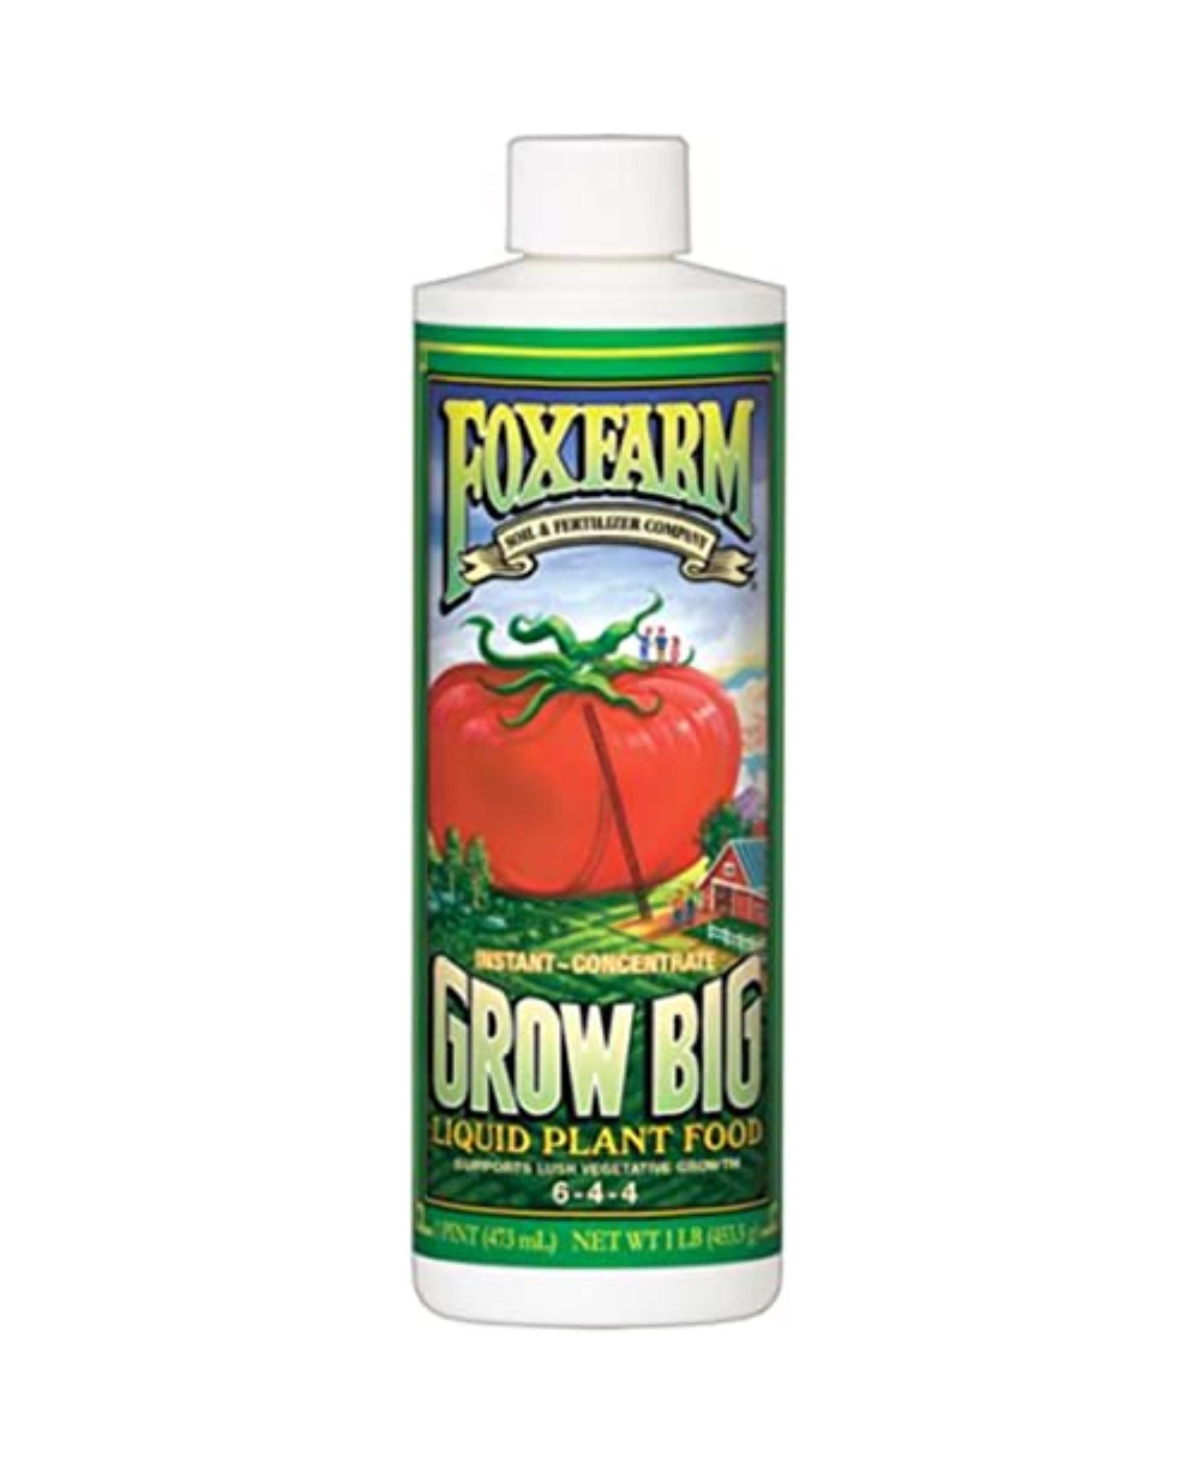 Grow Big Liquid Plant Food 6-4-4, Concentrate - 1 pint - Brown